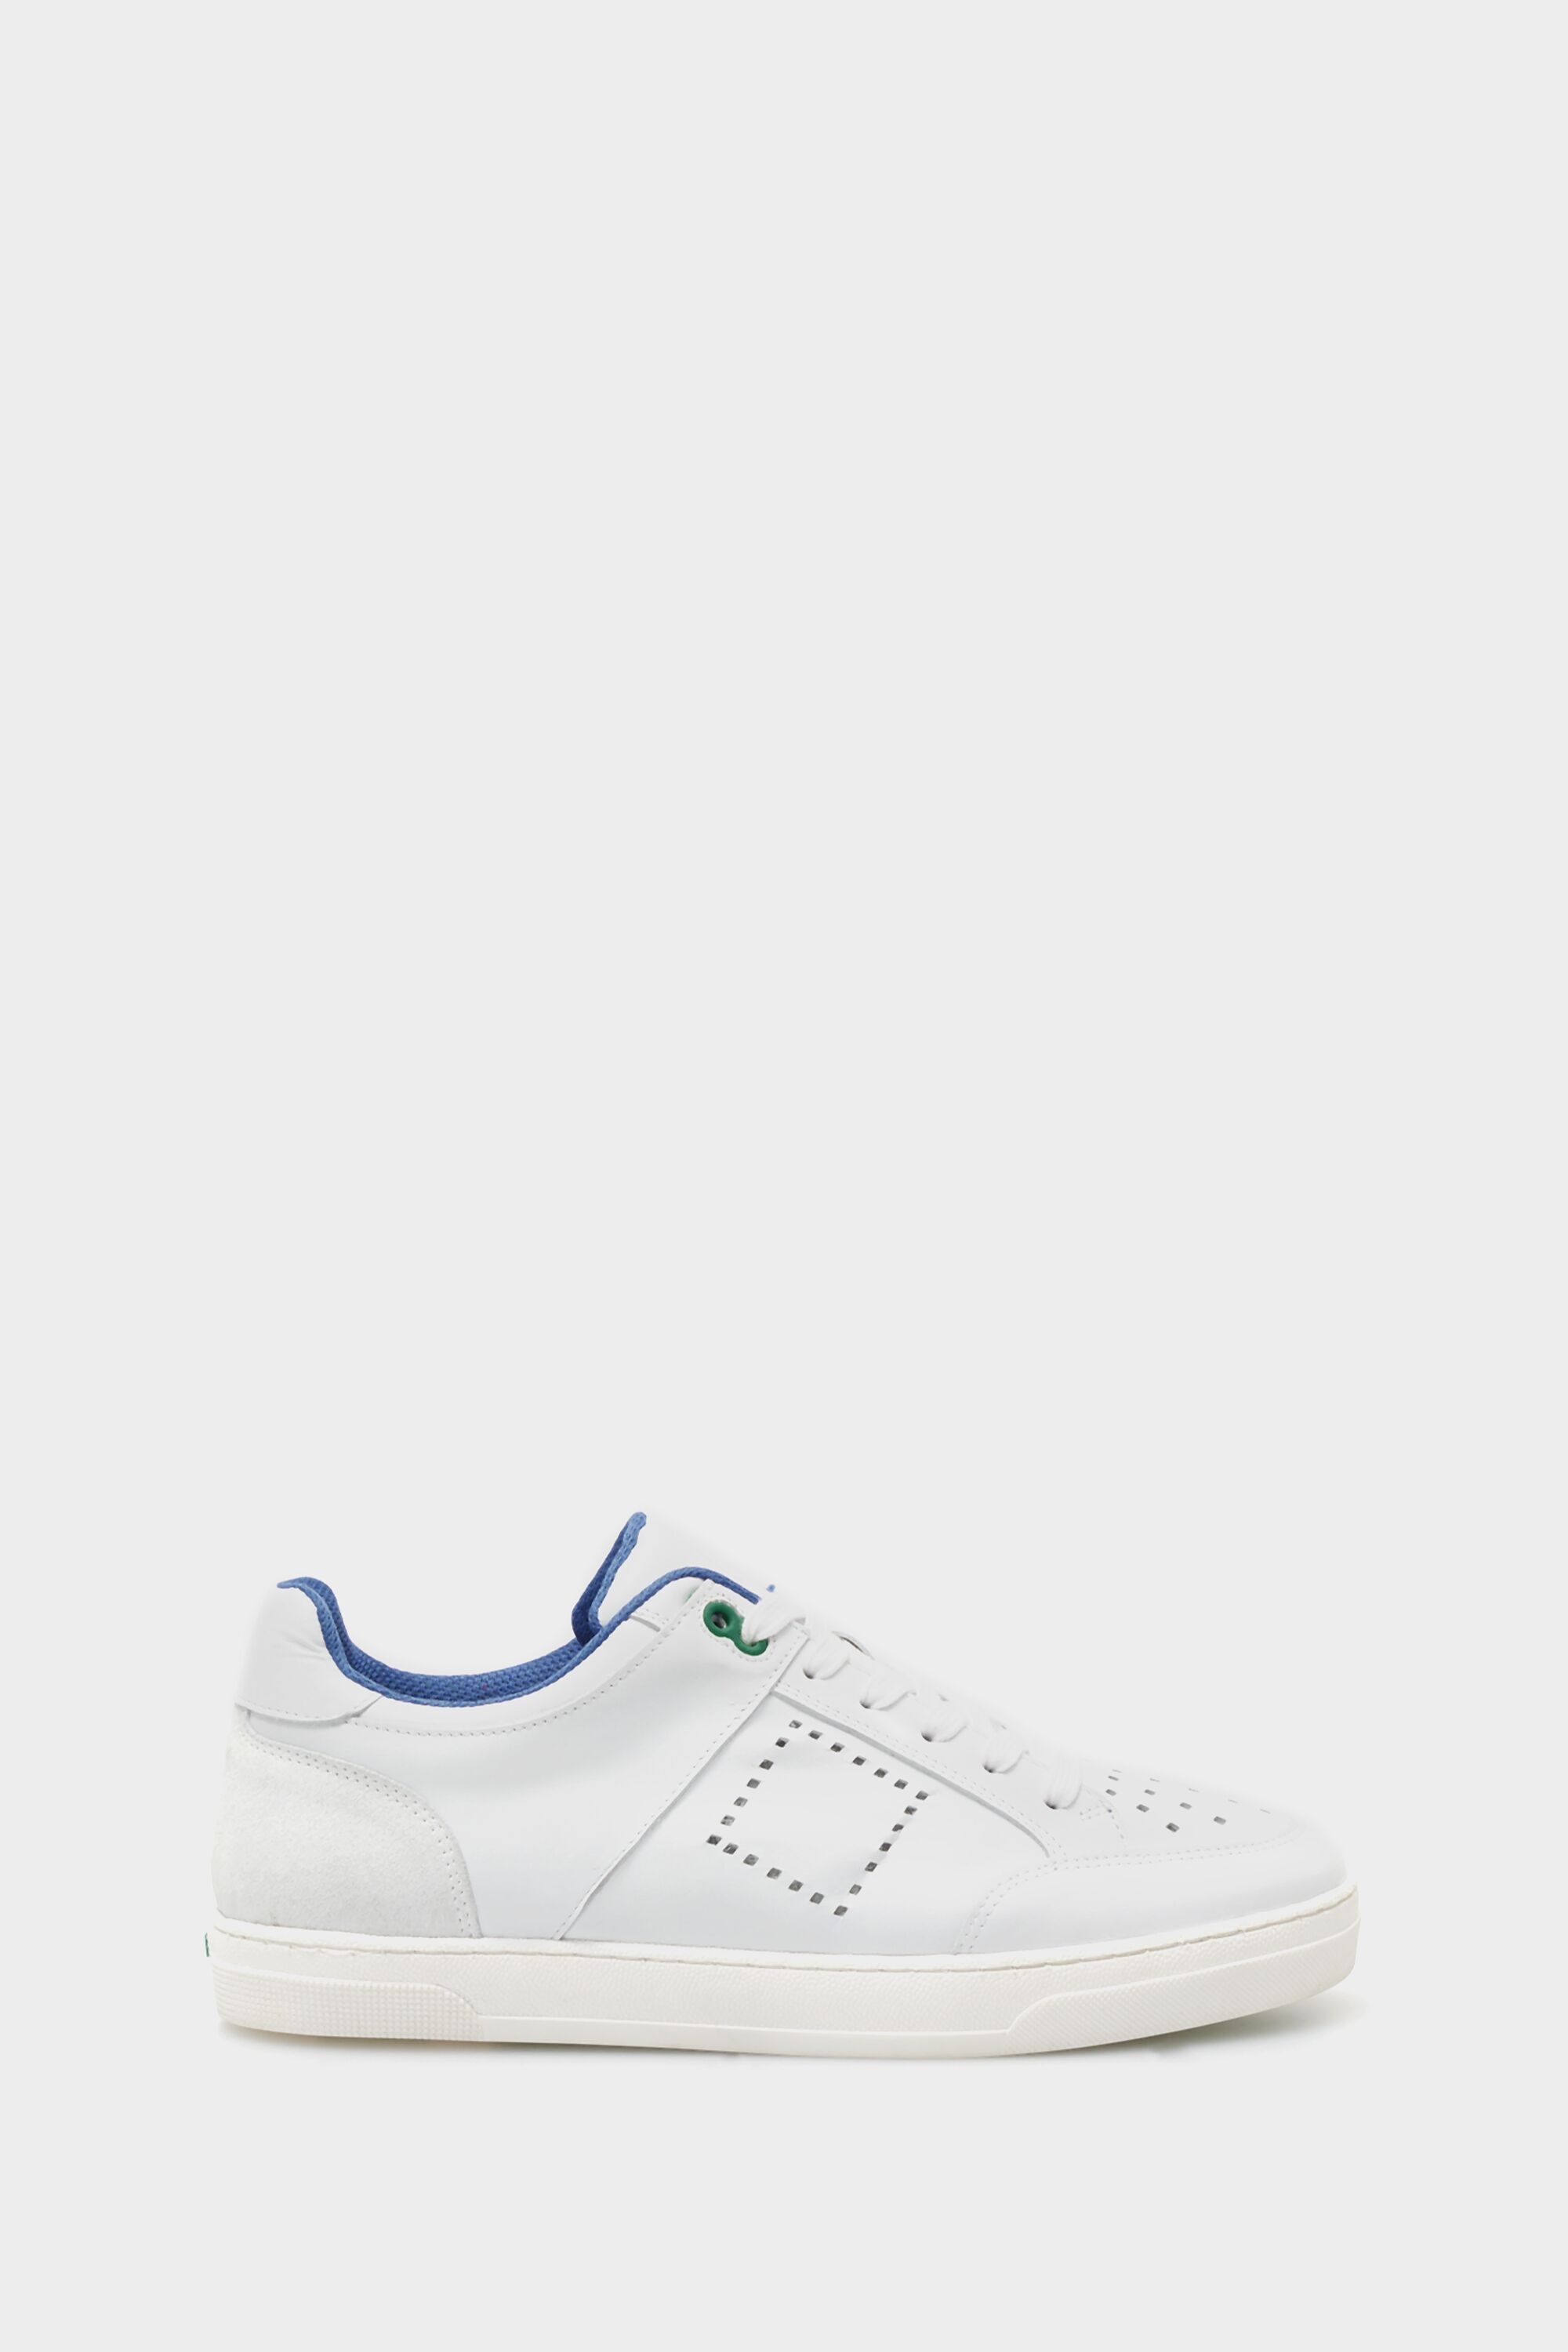 Cube perforated leather sneakers